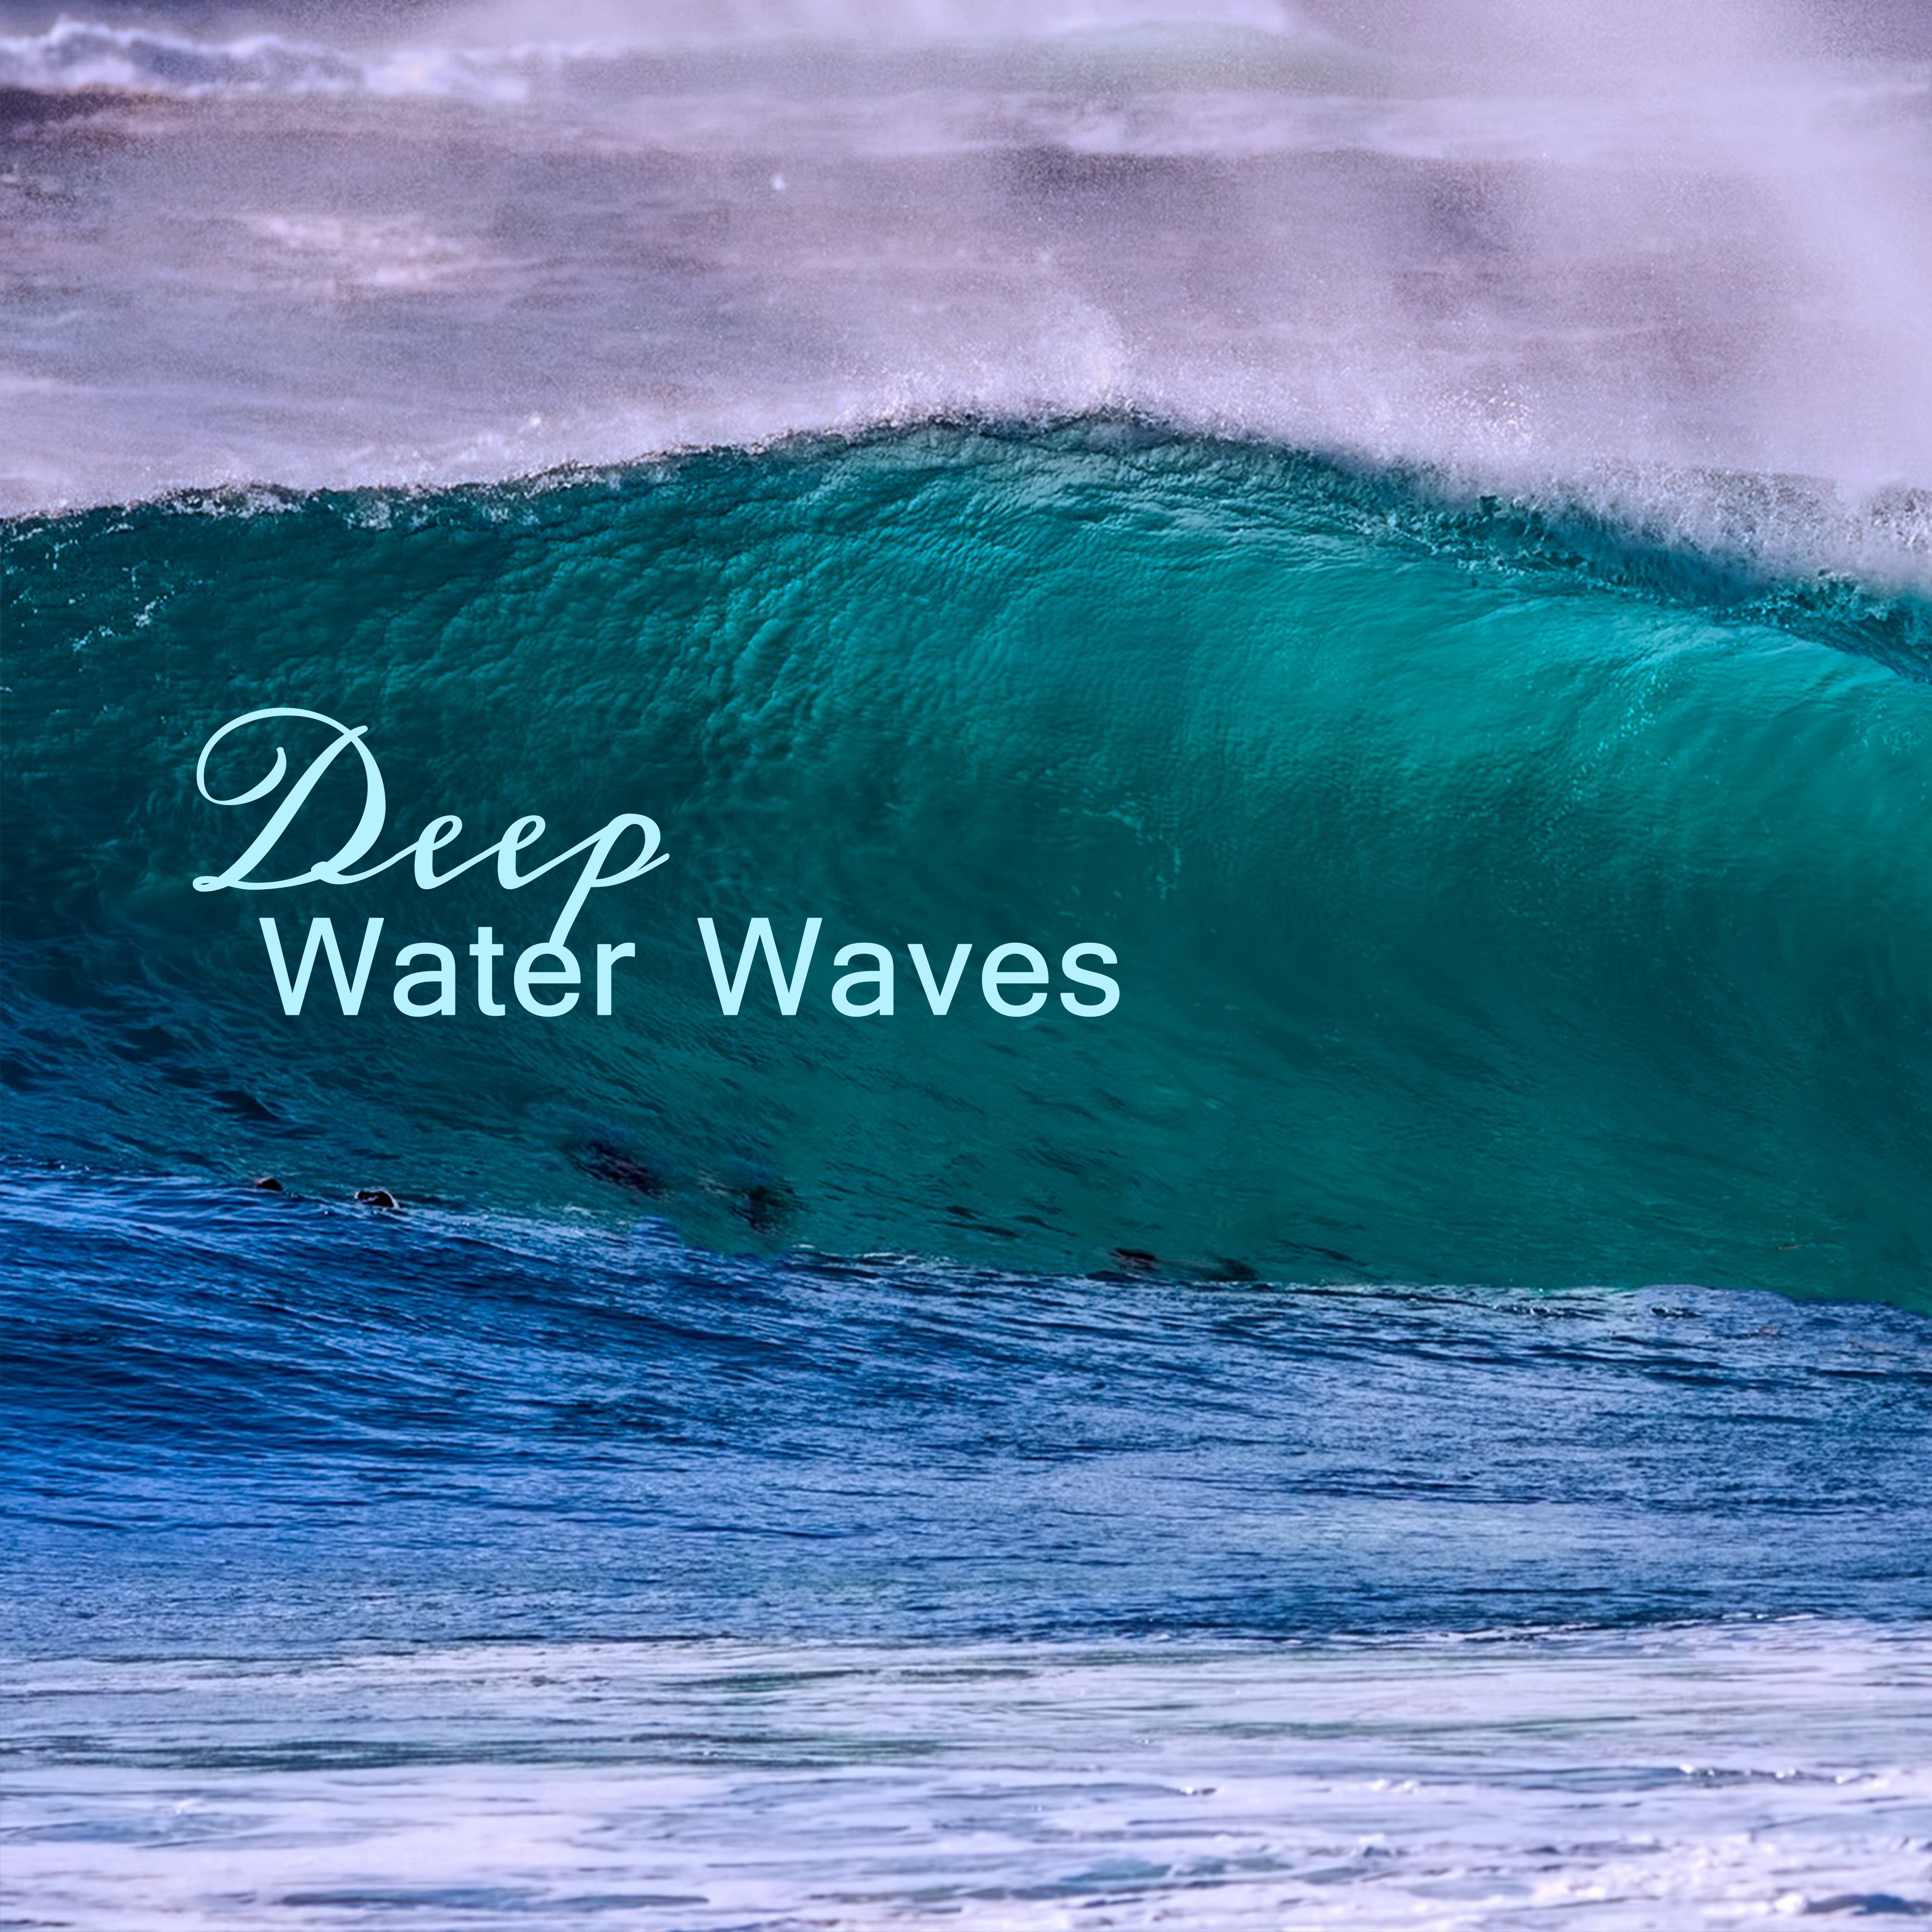 Deep Water Waves – Peaceful Nature Music, Rest with Ocean Sounds, New Age Relaxation Melodies